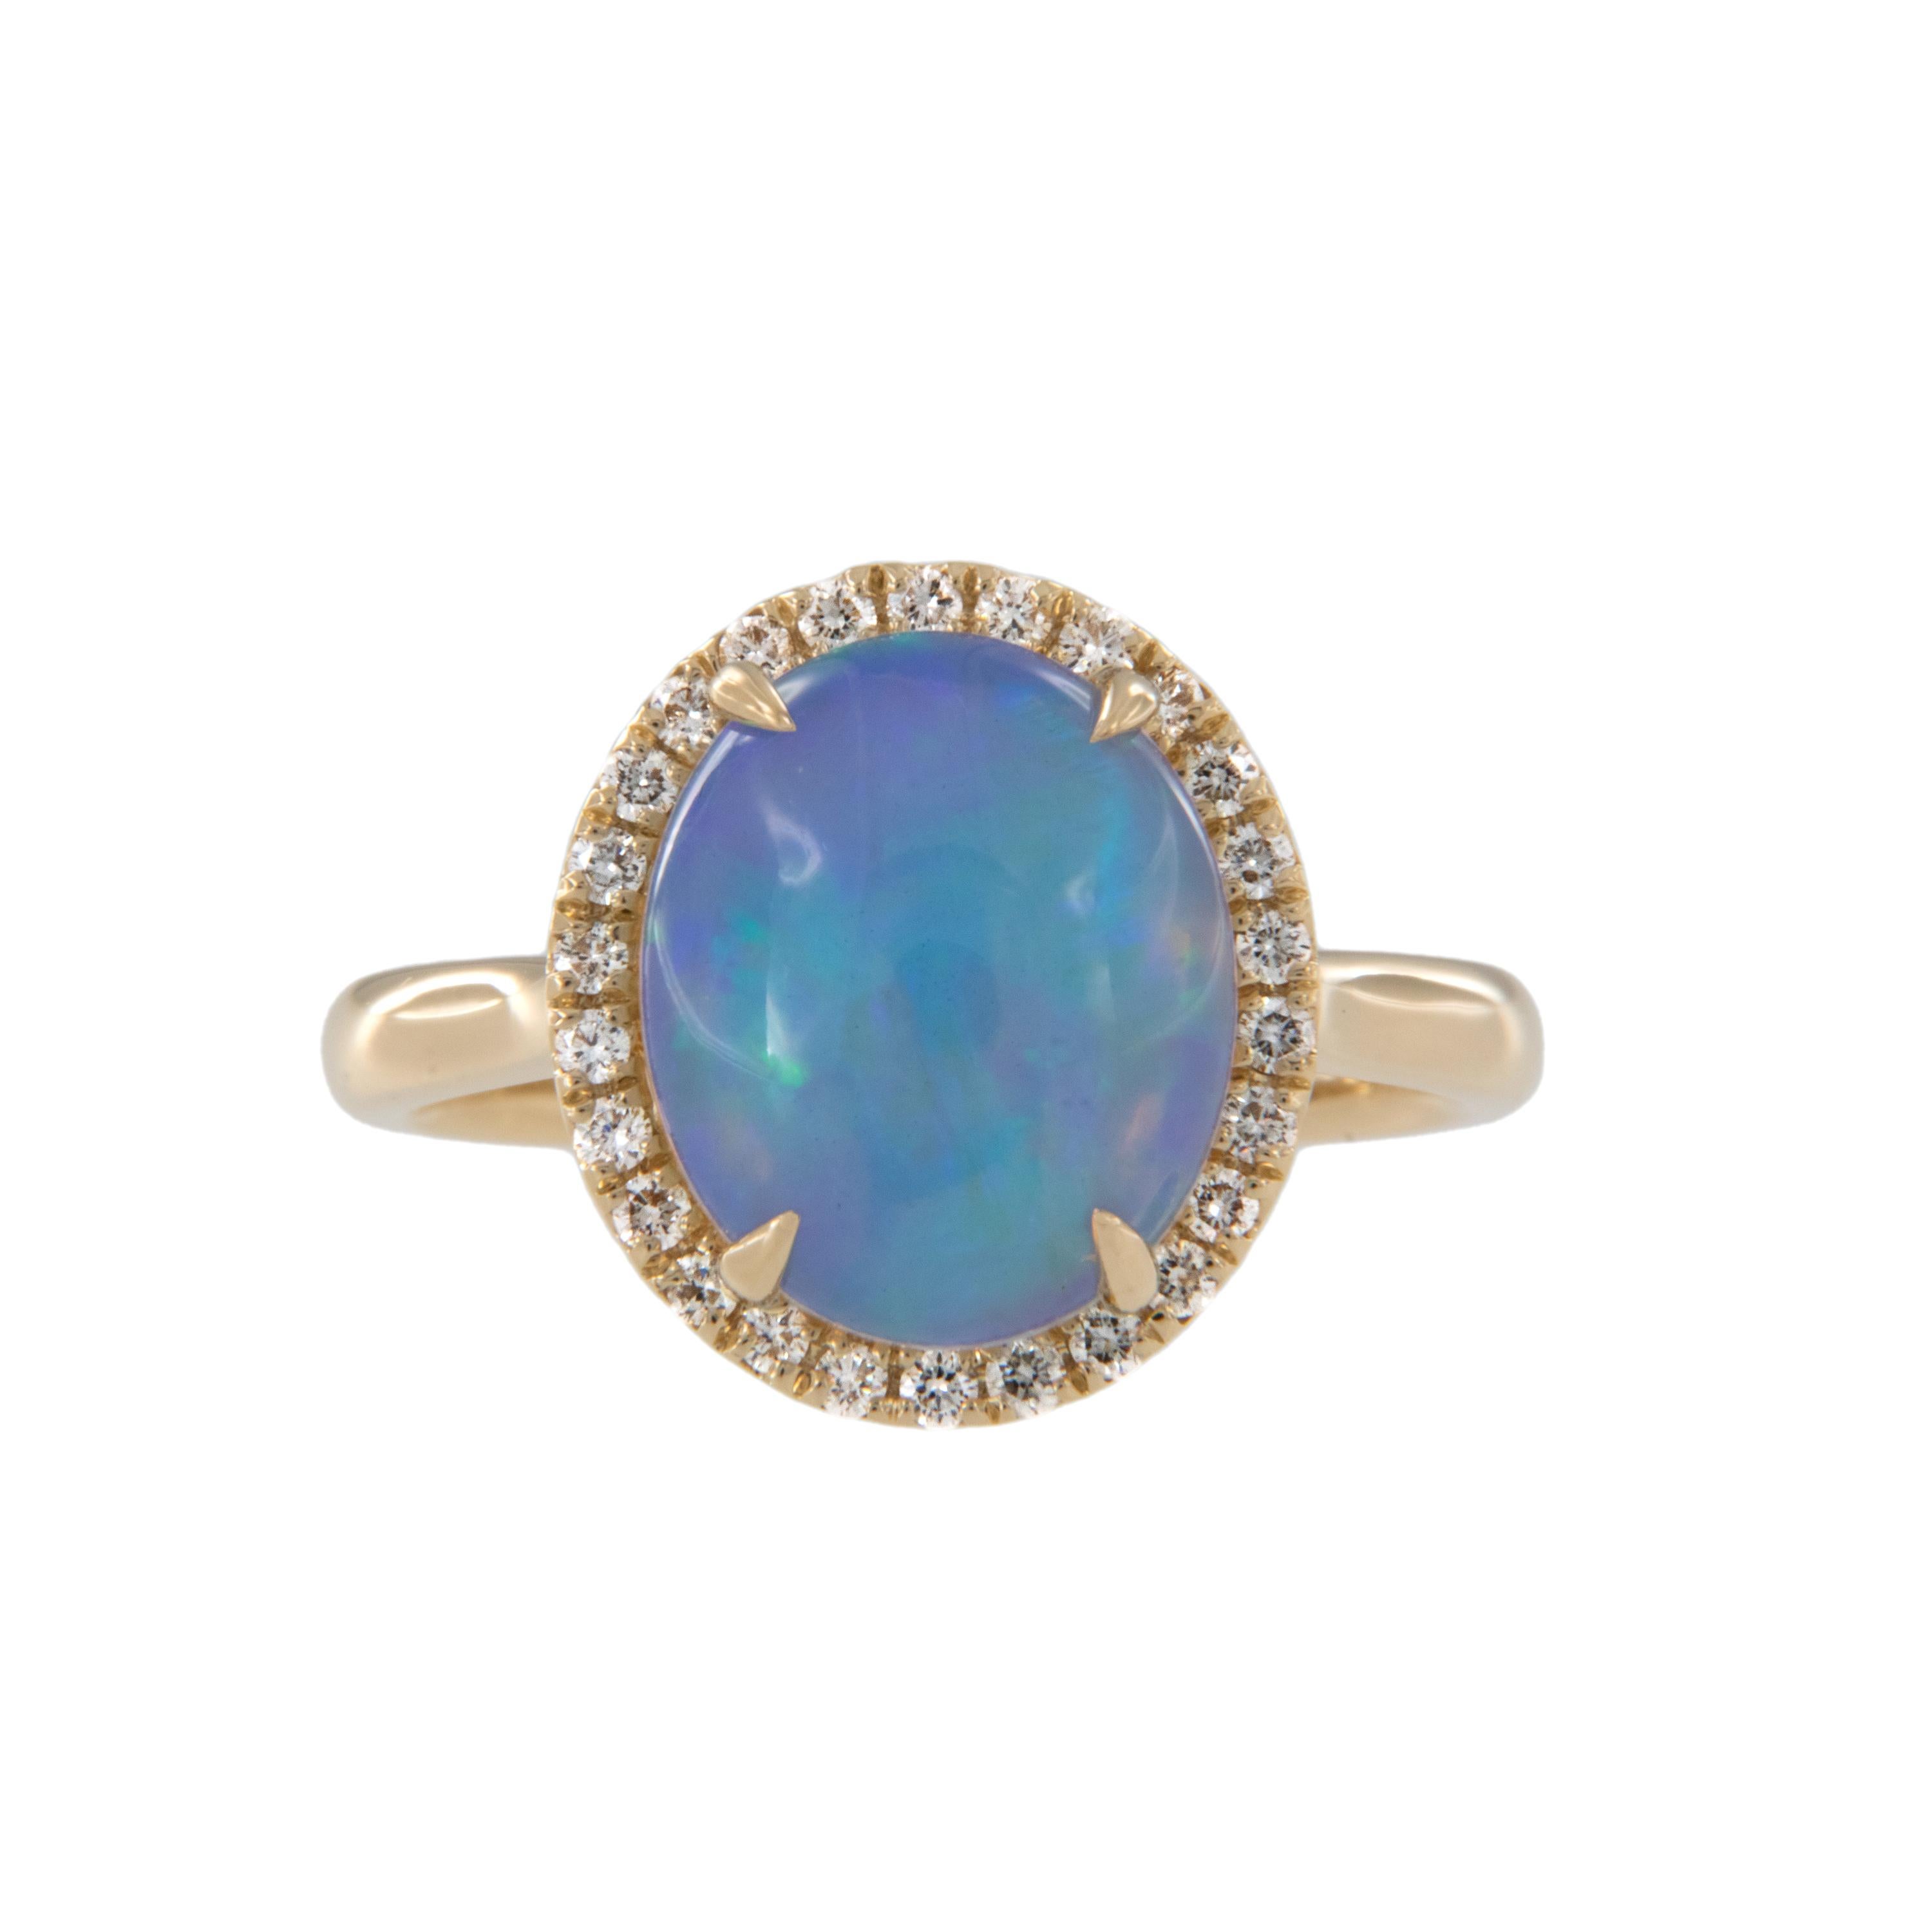 Breathtaking jelly opal with lovely blue and green play of color takes center stage in this enchanting ring! Made from rich 18 karat yellow gold with diamond halo = 0.26 Cttw. 2.60 Carat Opal is 12 x 10mm oval cabochon cut. Ring is a size 7 and is